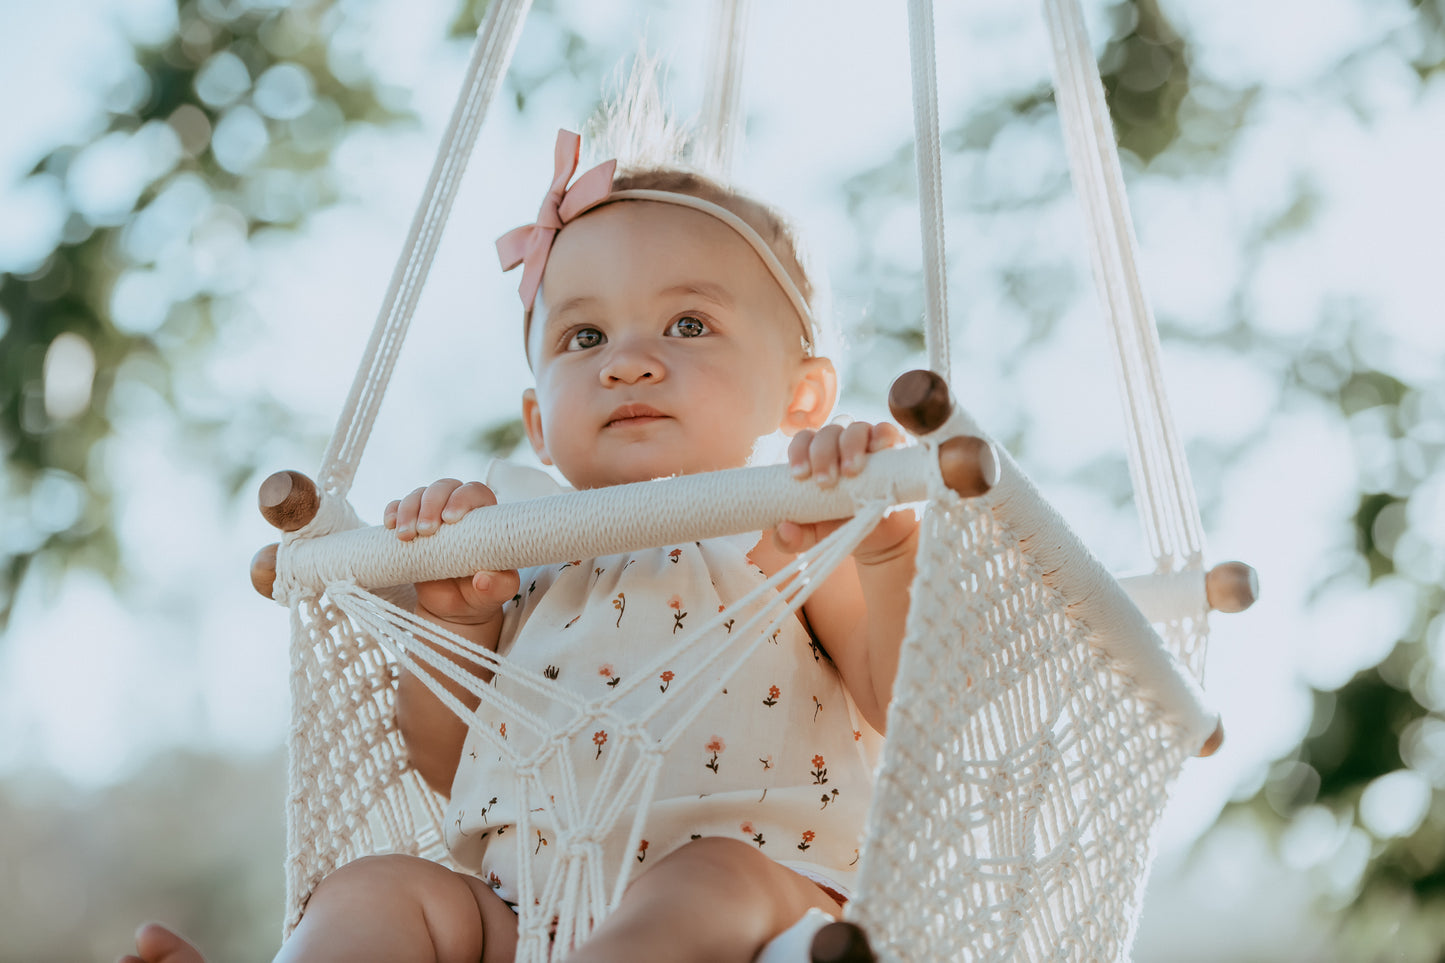 close-up of a baby sitting on a macrame swing chair